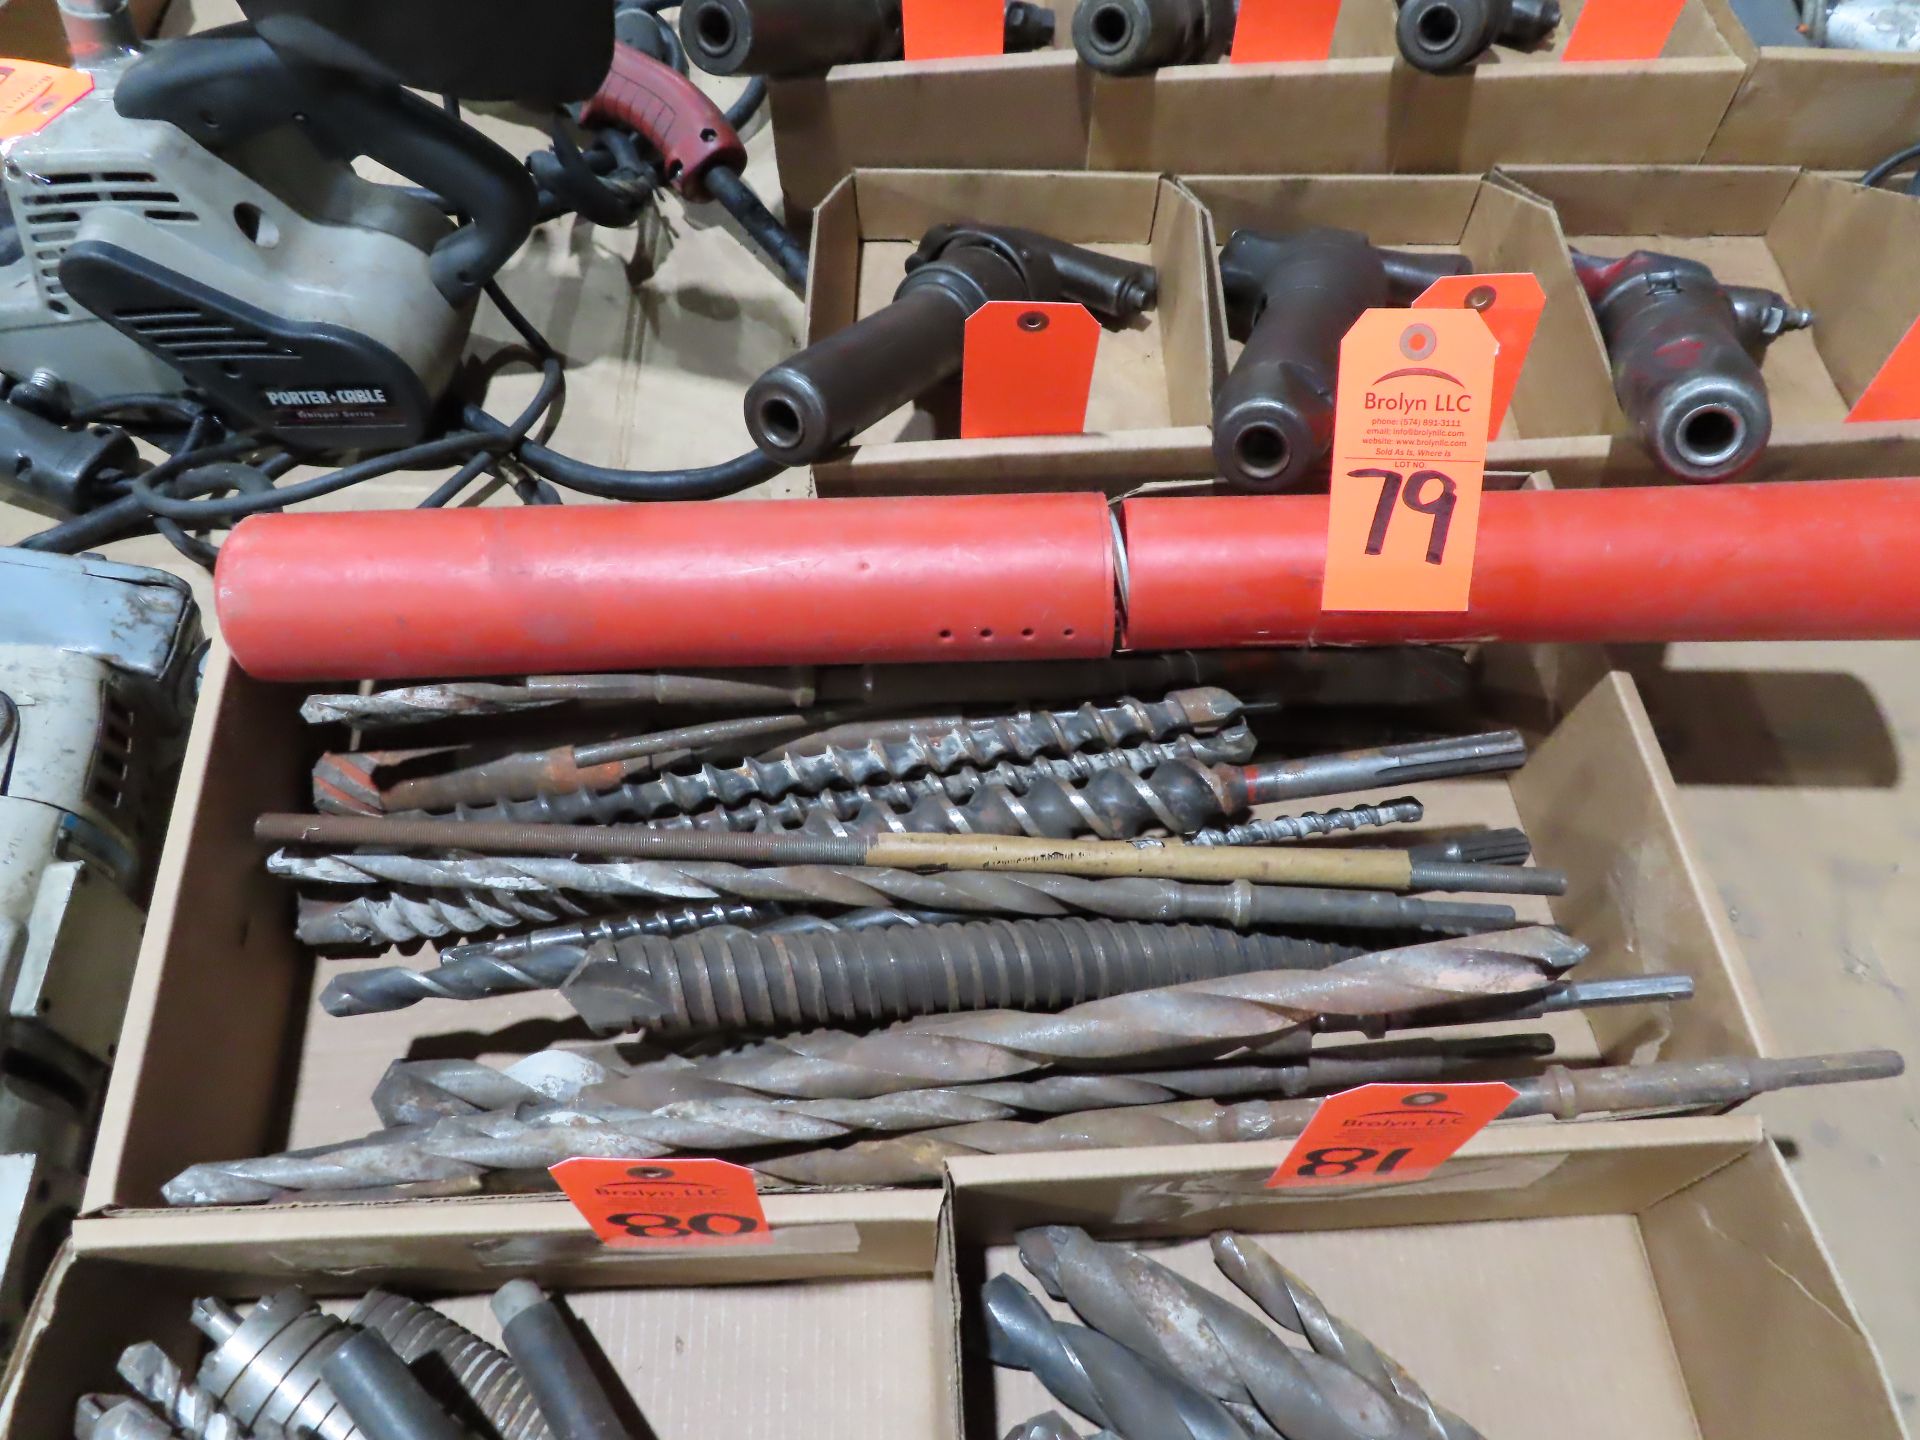 Large assortment of hammer drill bits. This item can be picked up onsite with no loading fee. Should